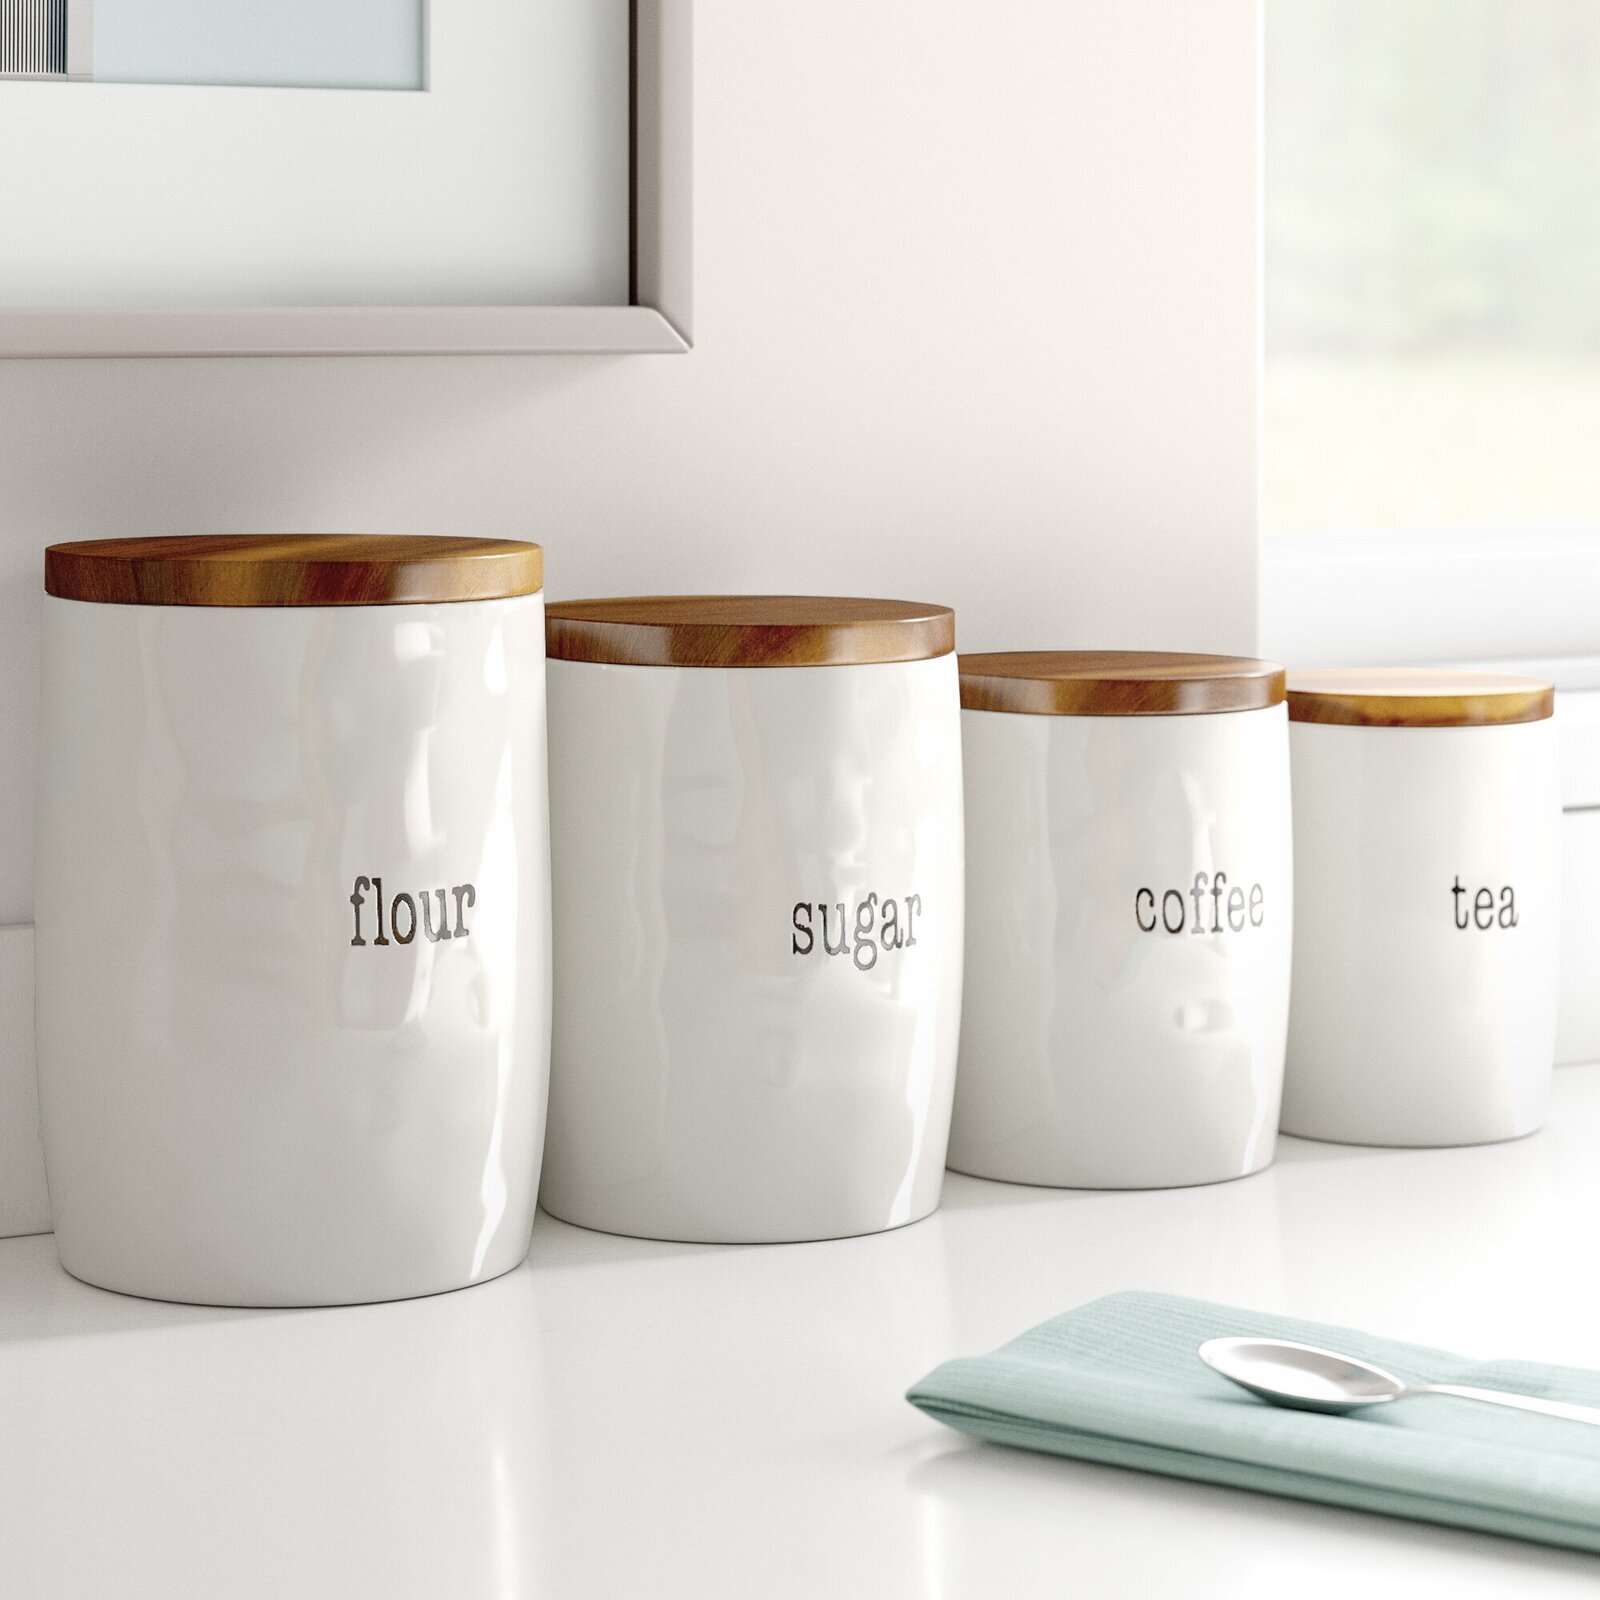 Farmhouse country style canister sets